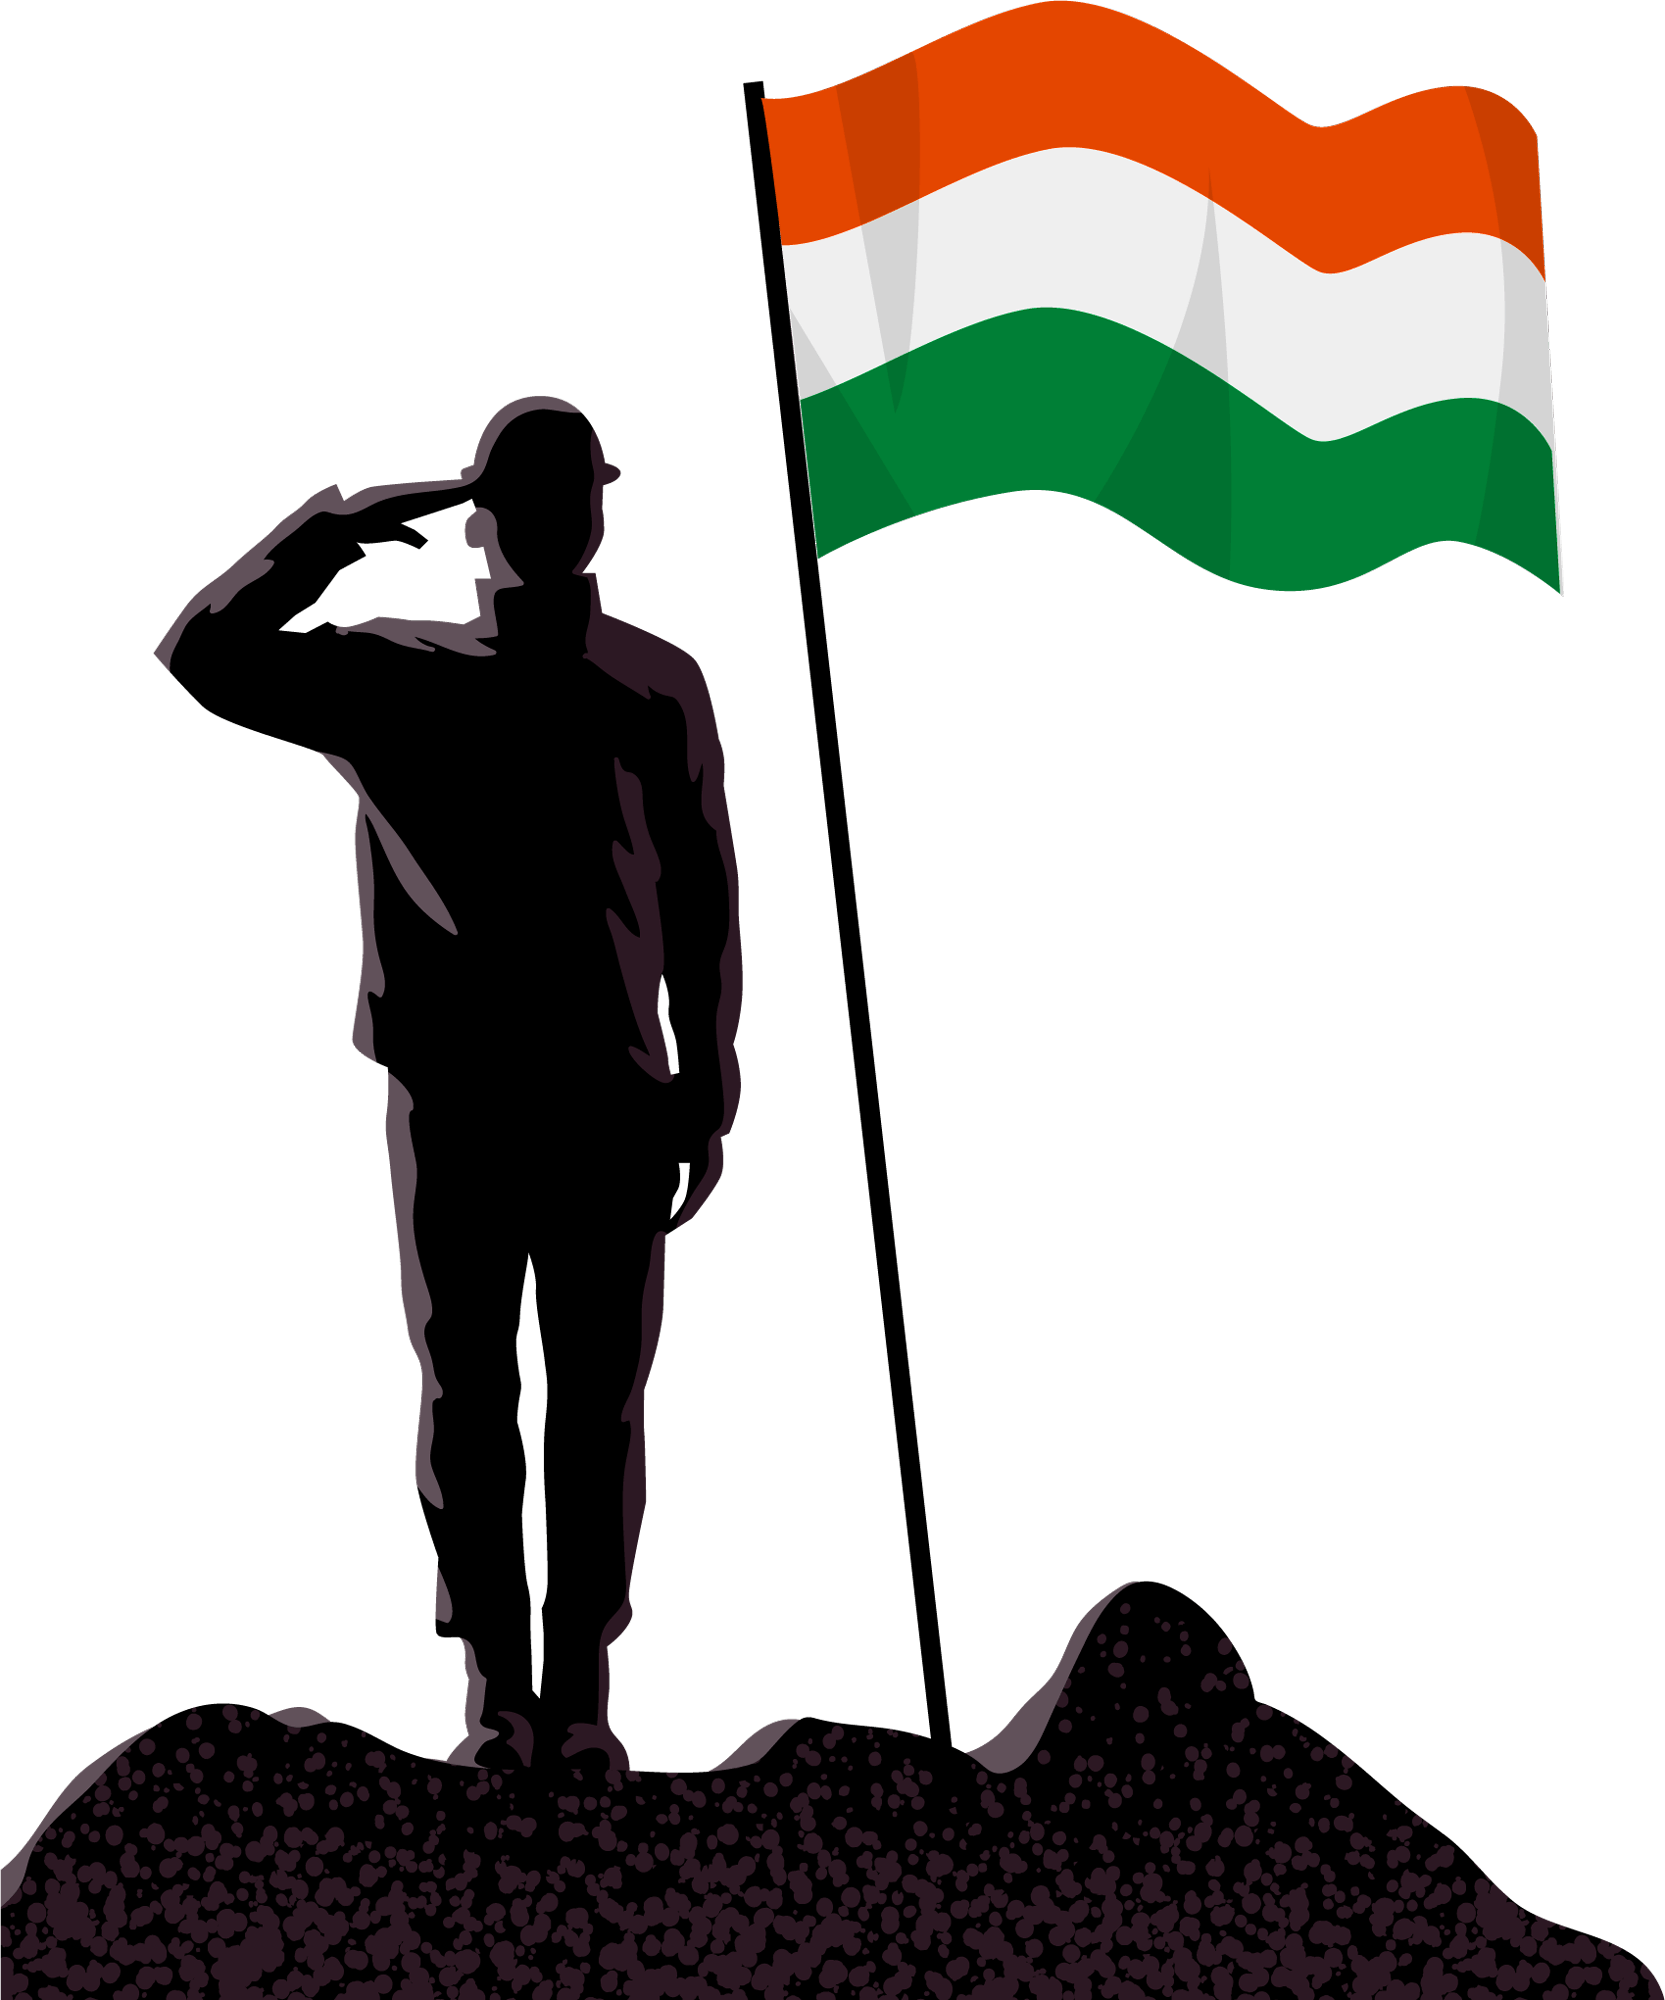 Indian armed forces Images and Stock Photos. 412 Indian armed forces  photography and royalty free pictures available to download from thousands  of stock photo providers.